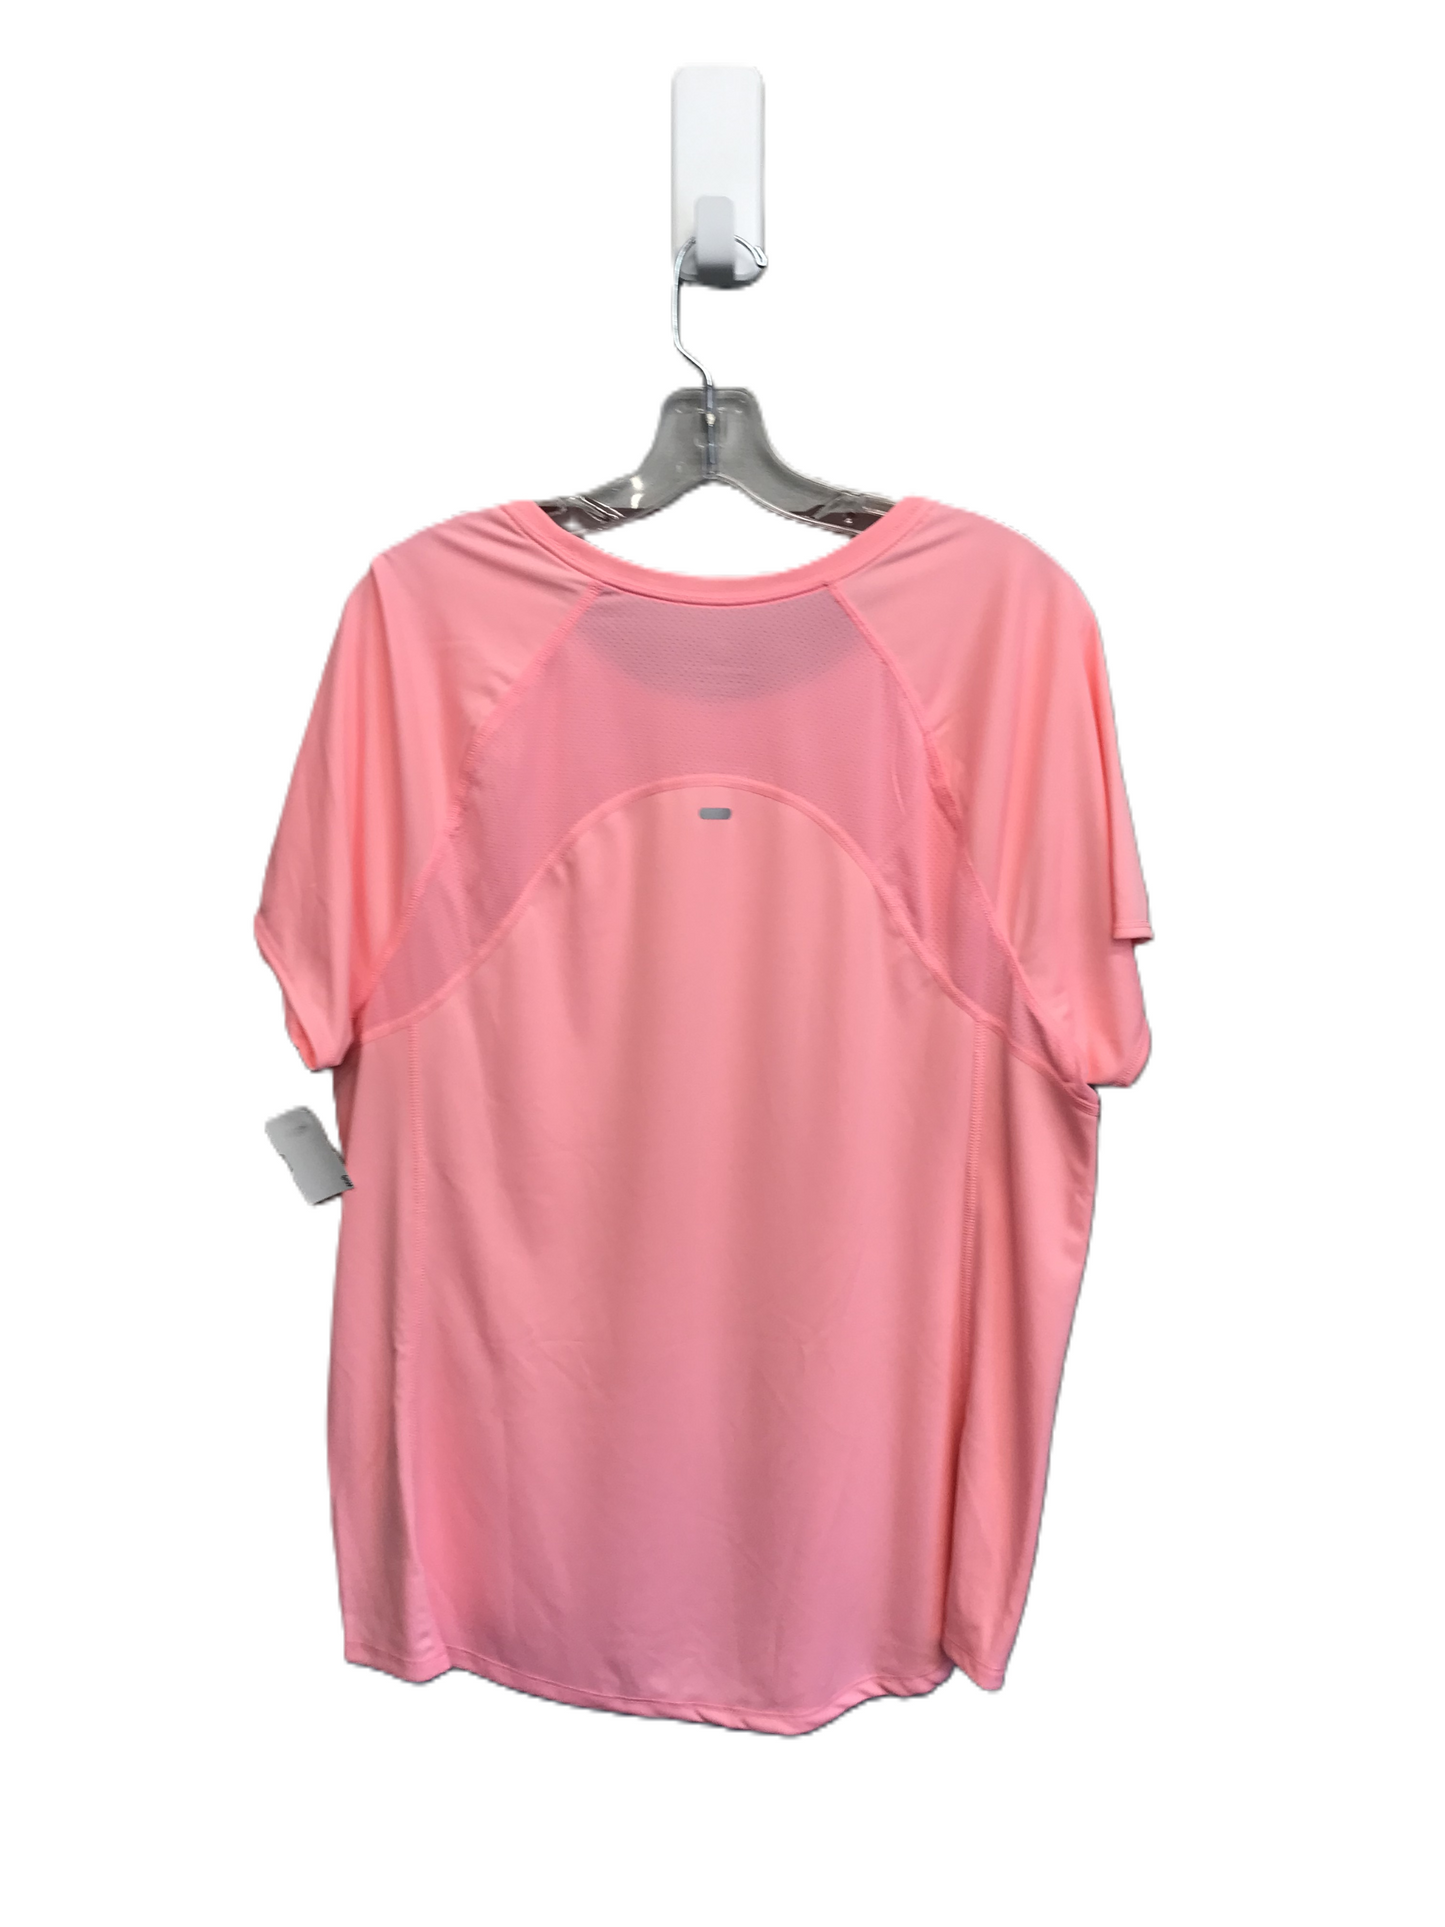 Pink Athletic Top Short Sleeve By Old Navy, Size: 1x